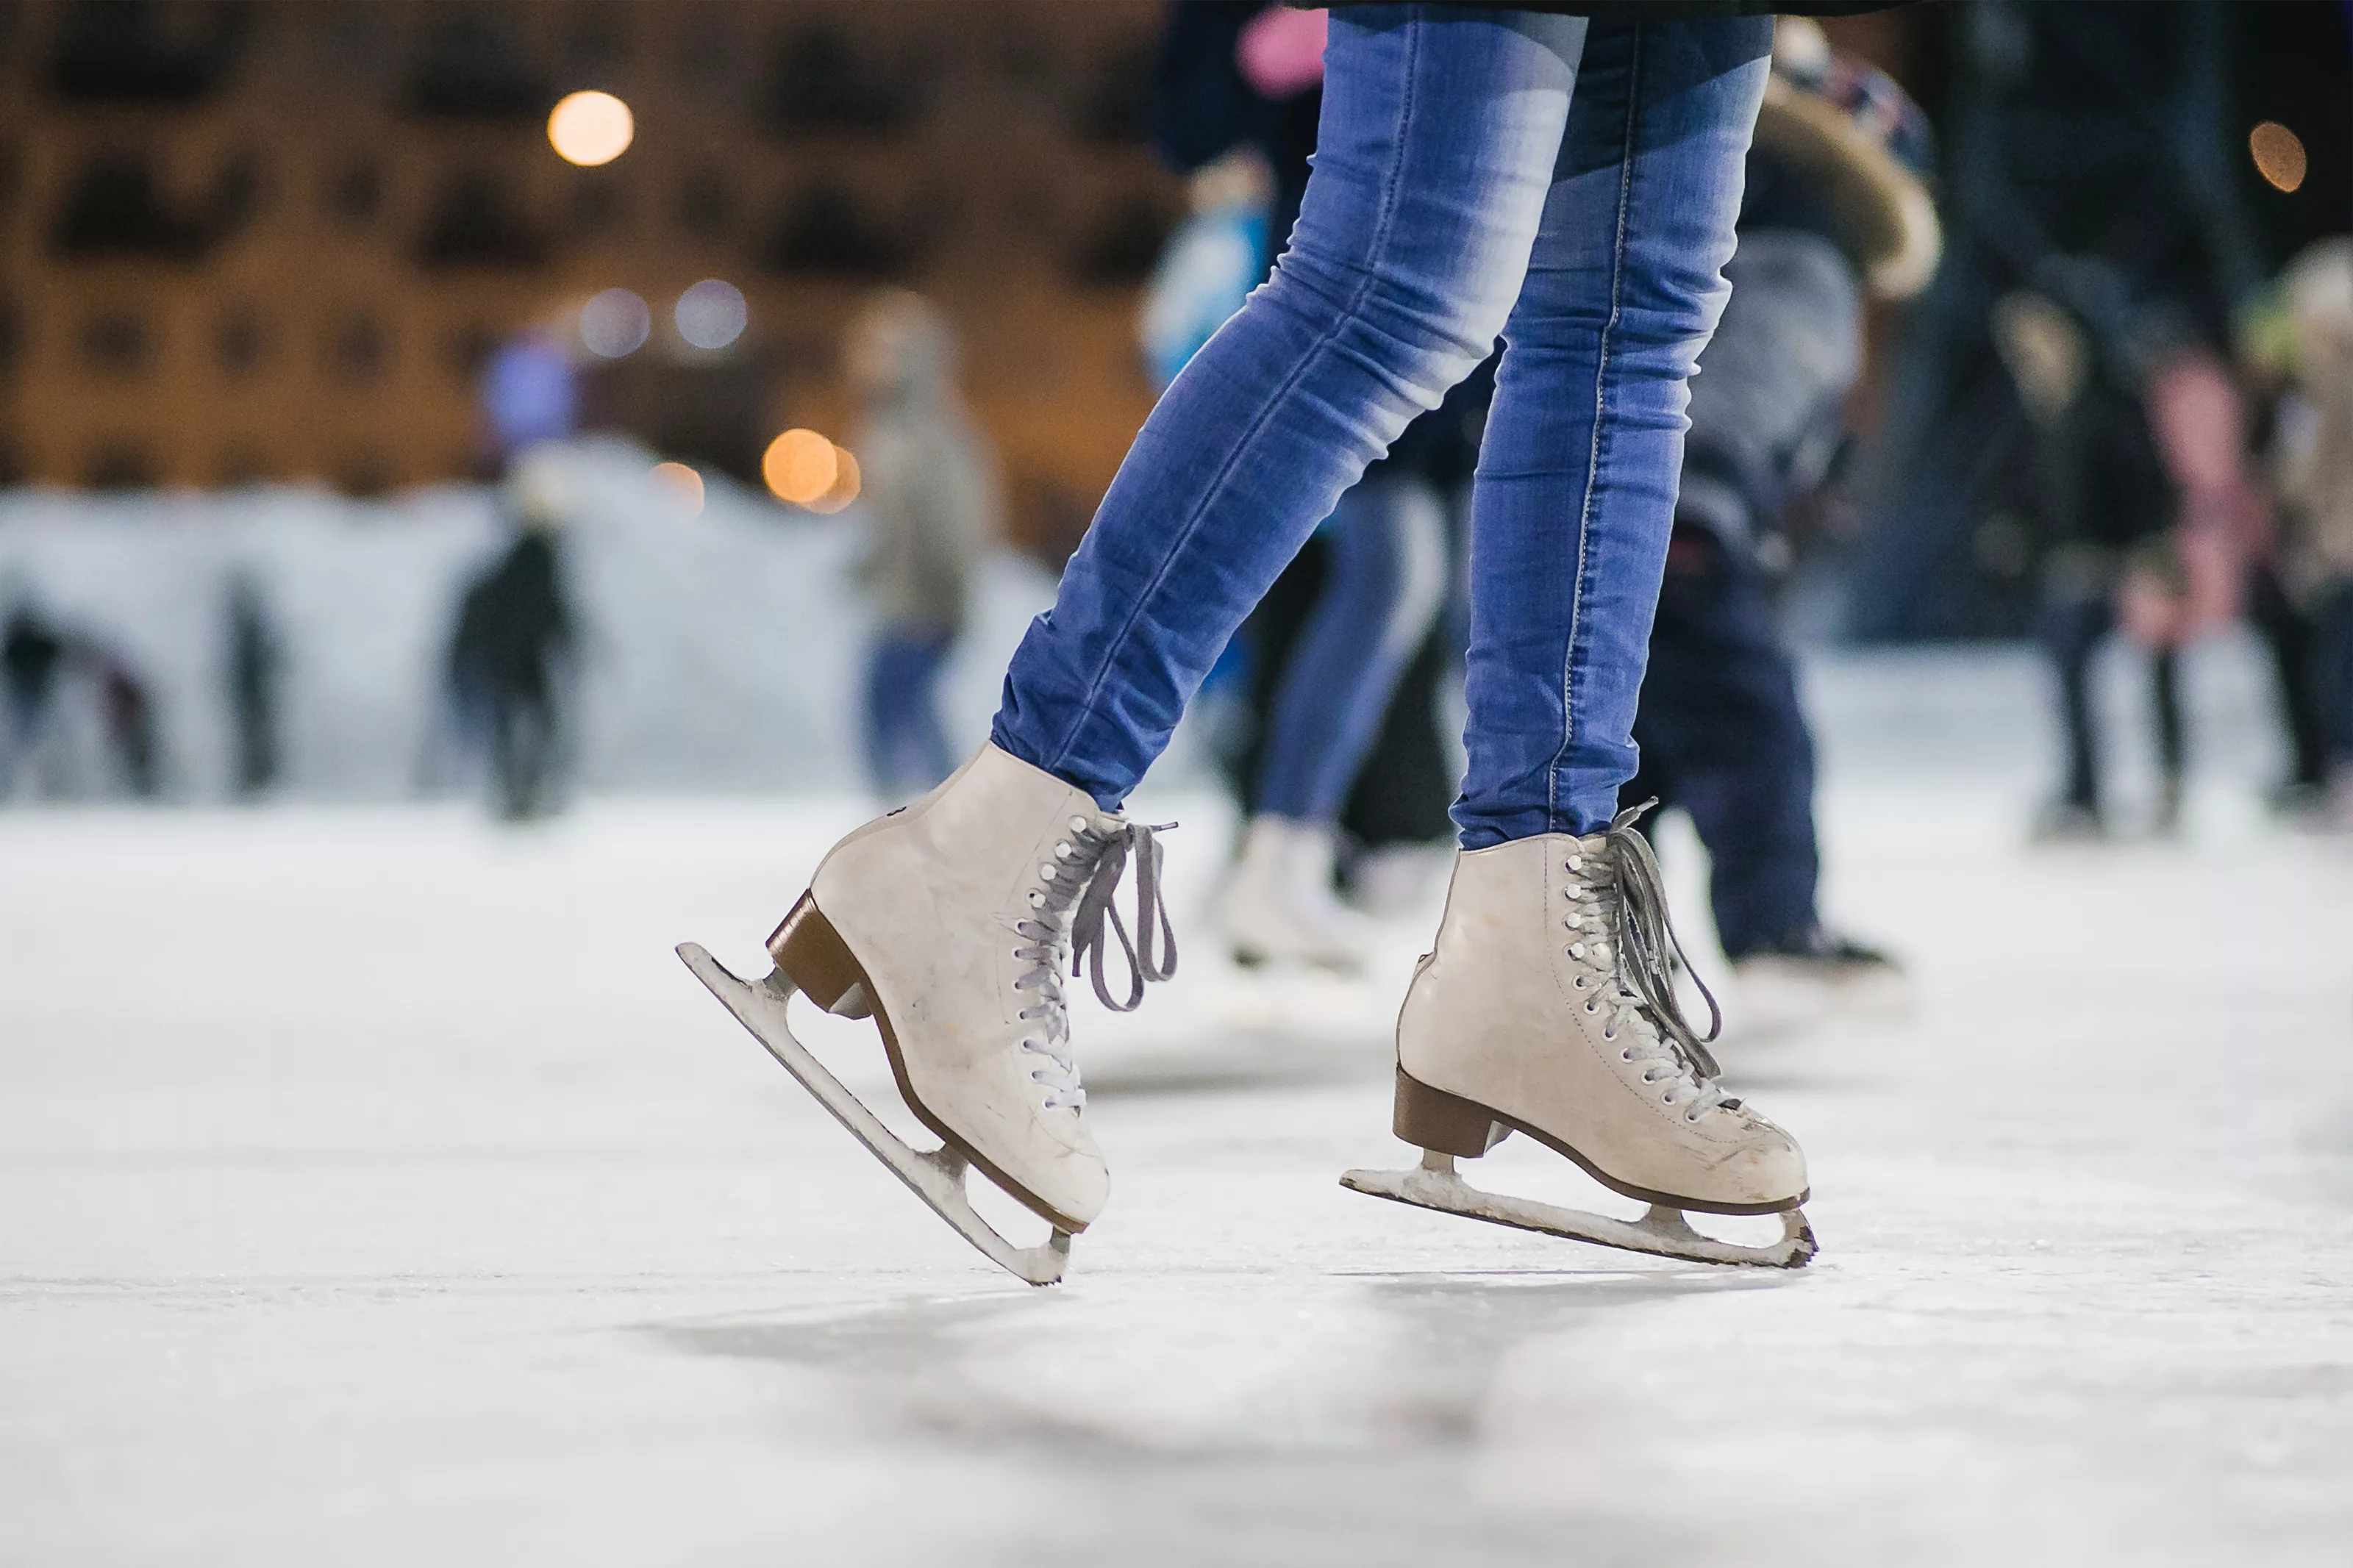 the girl on the figured skates on a skating rink